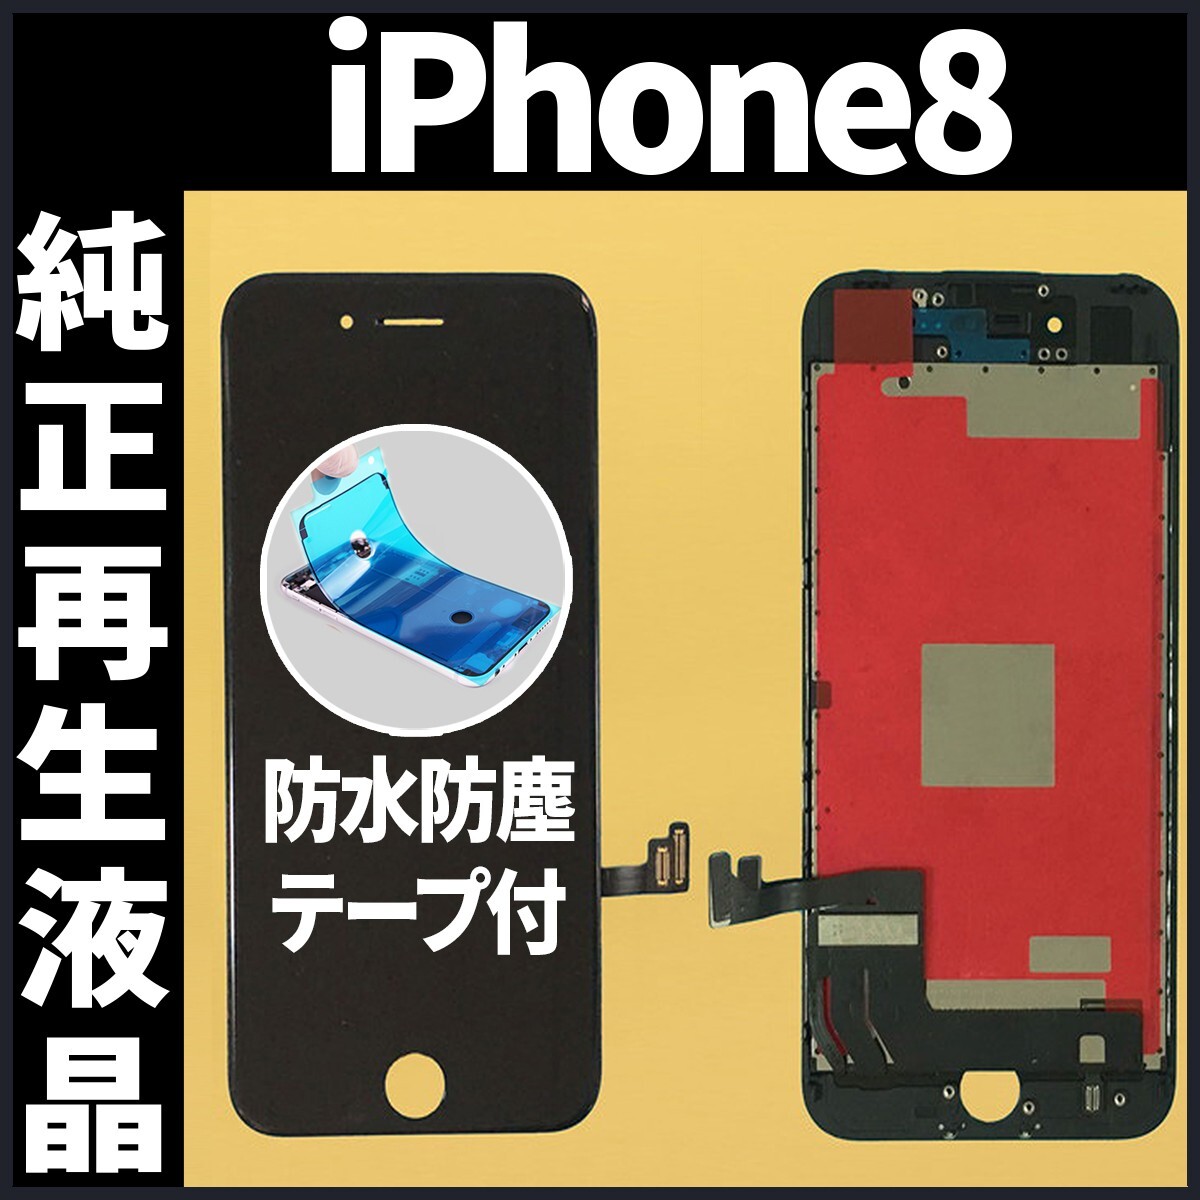 iPhone8 original reproduction goods front panel black original liquid crystal our company reproduction trader LCD exchange repair screen crack iphone repair the glass crack waterproof tape attaching tool less 